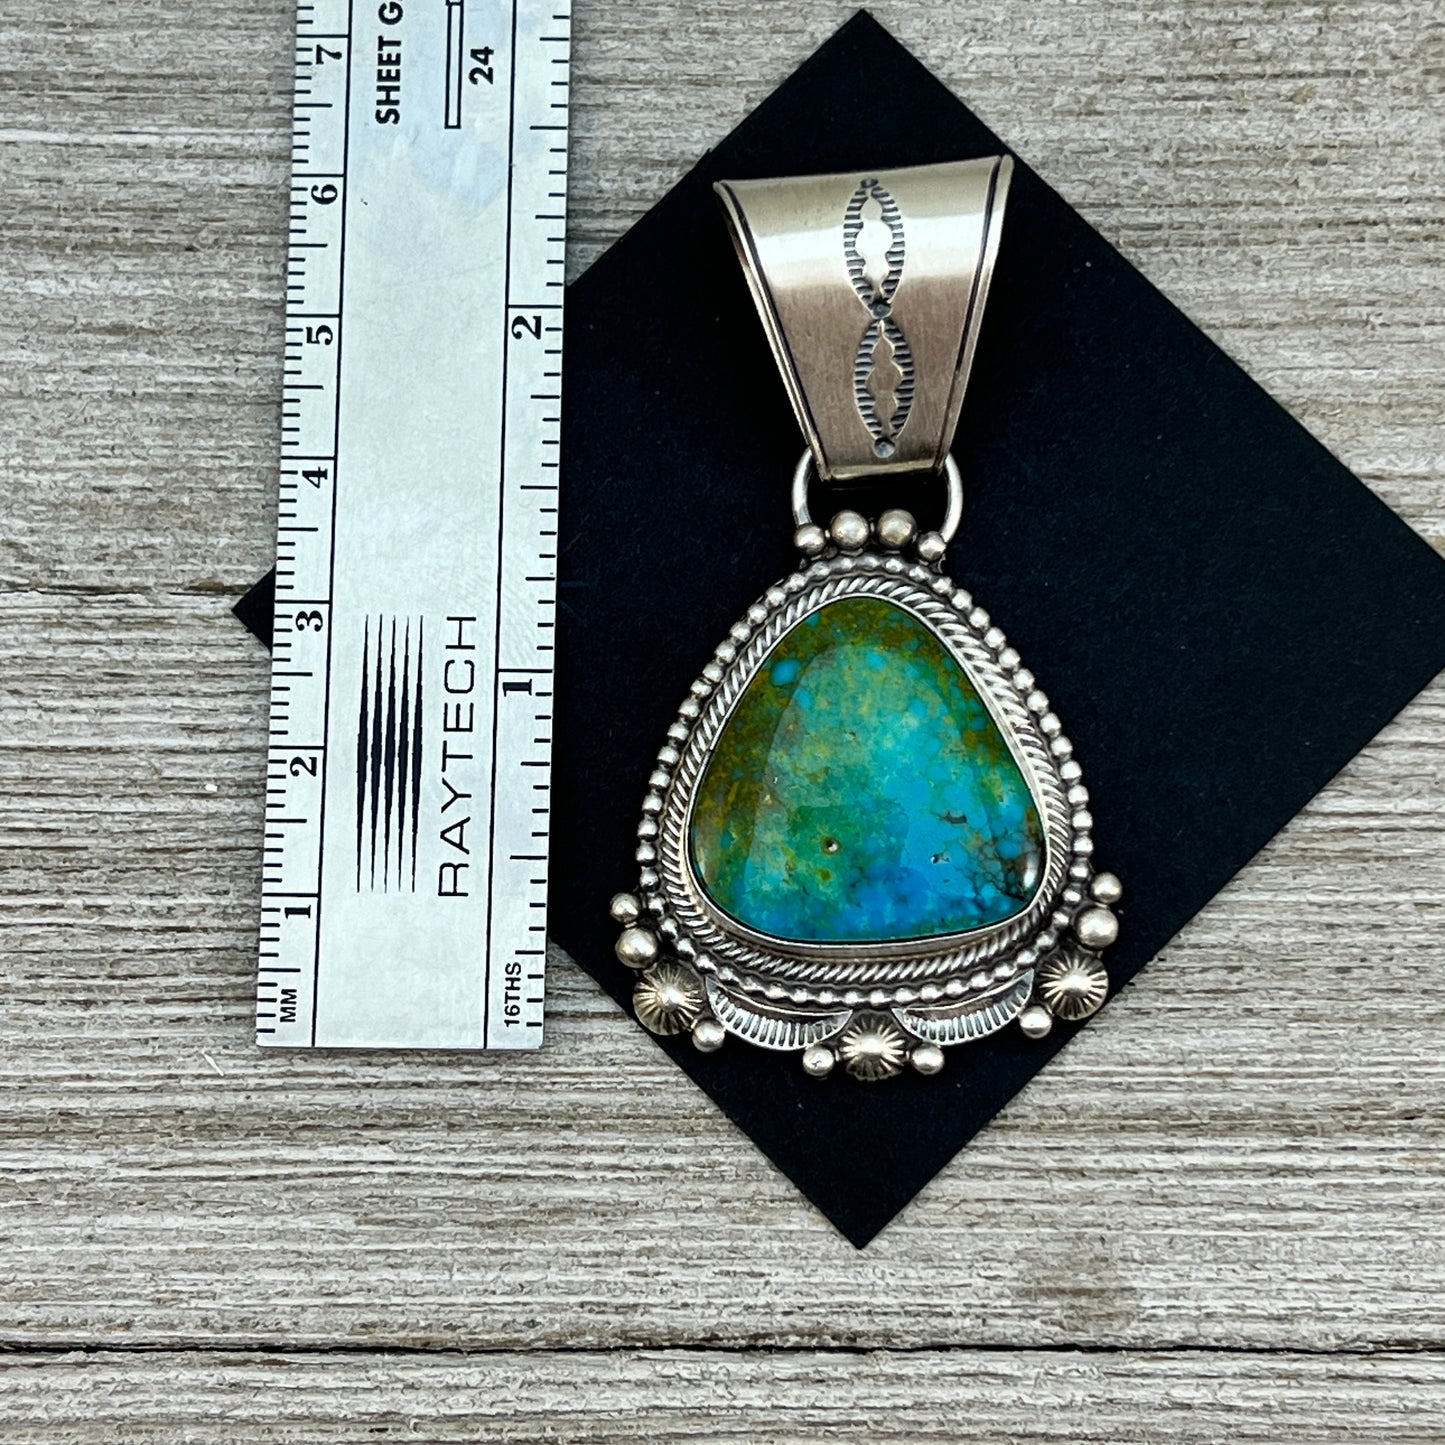 Kingman polychrome Turquoise pendant #2 sterling silver turquoise Navajo  handmade Tom Lewis signed